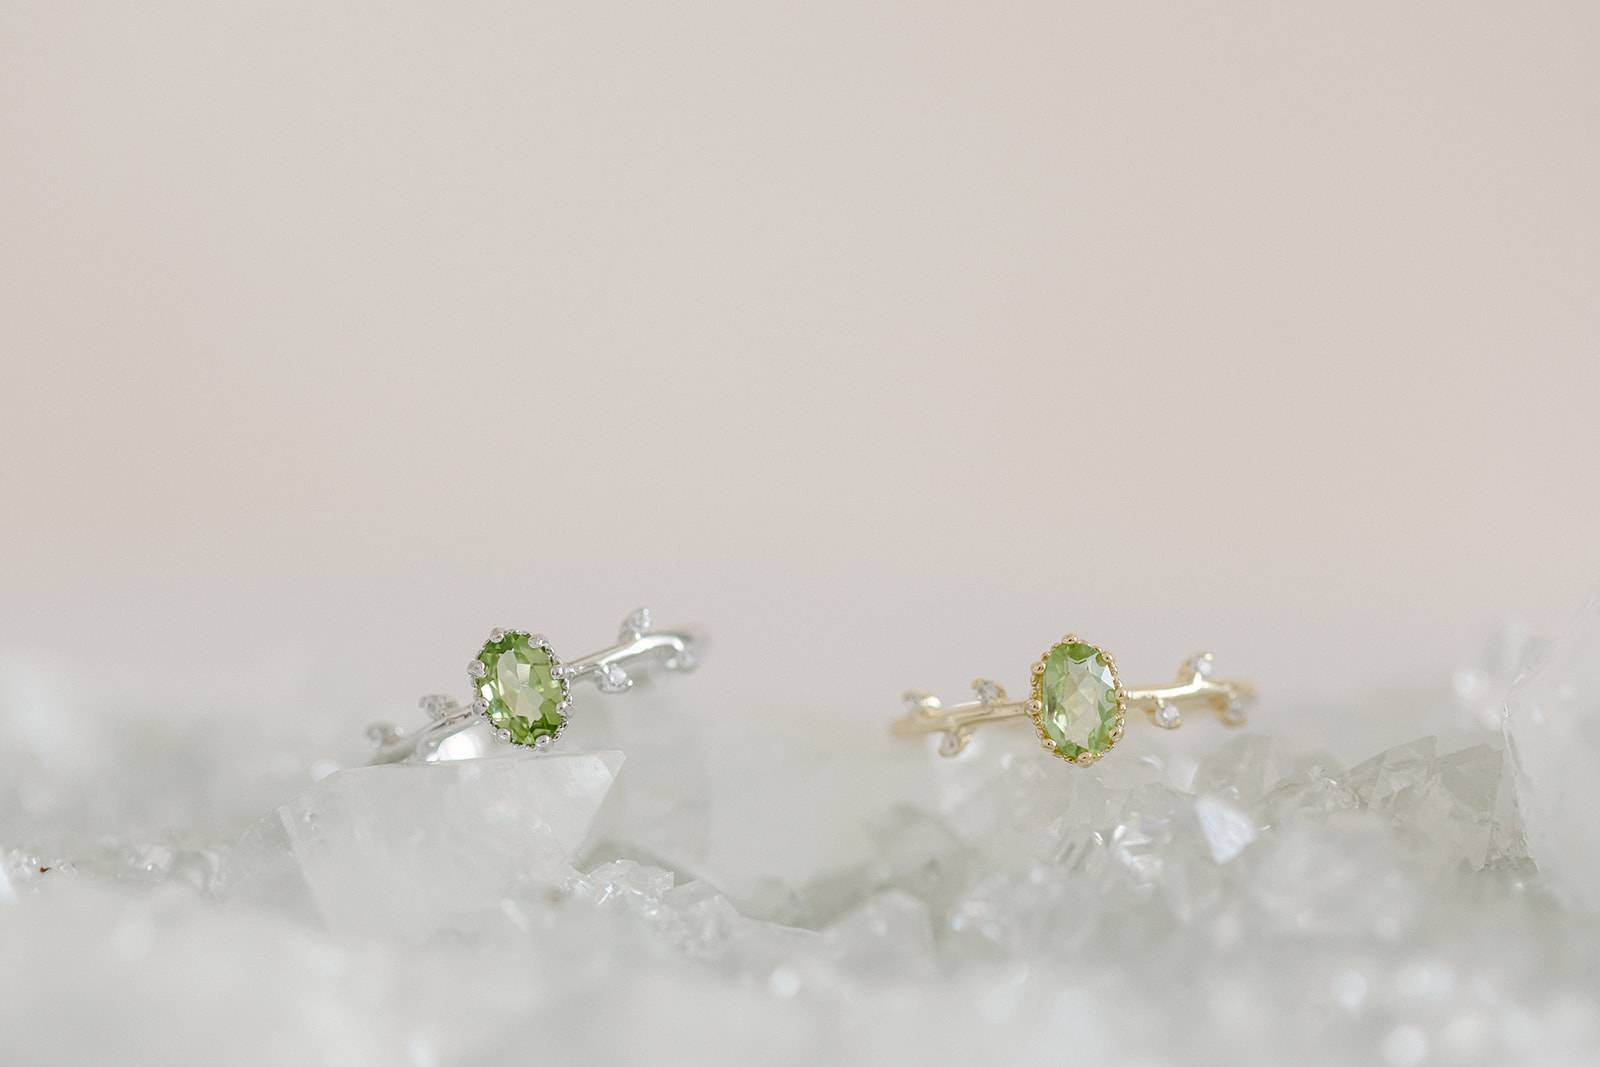 Peridot Ring - Fine Jewelry Collection